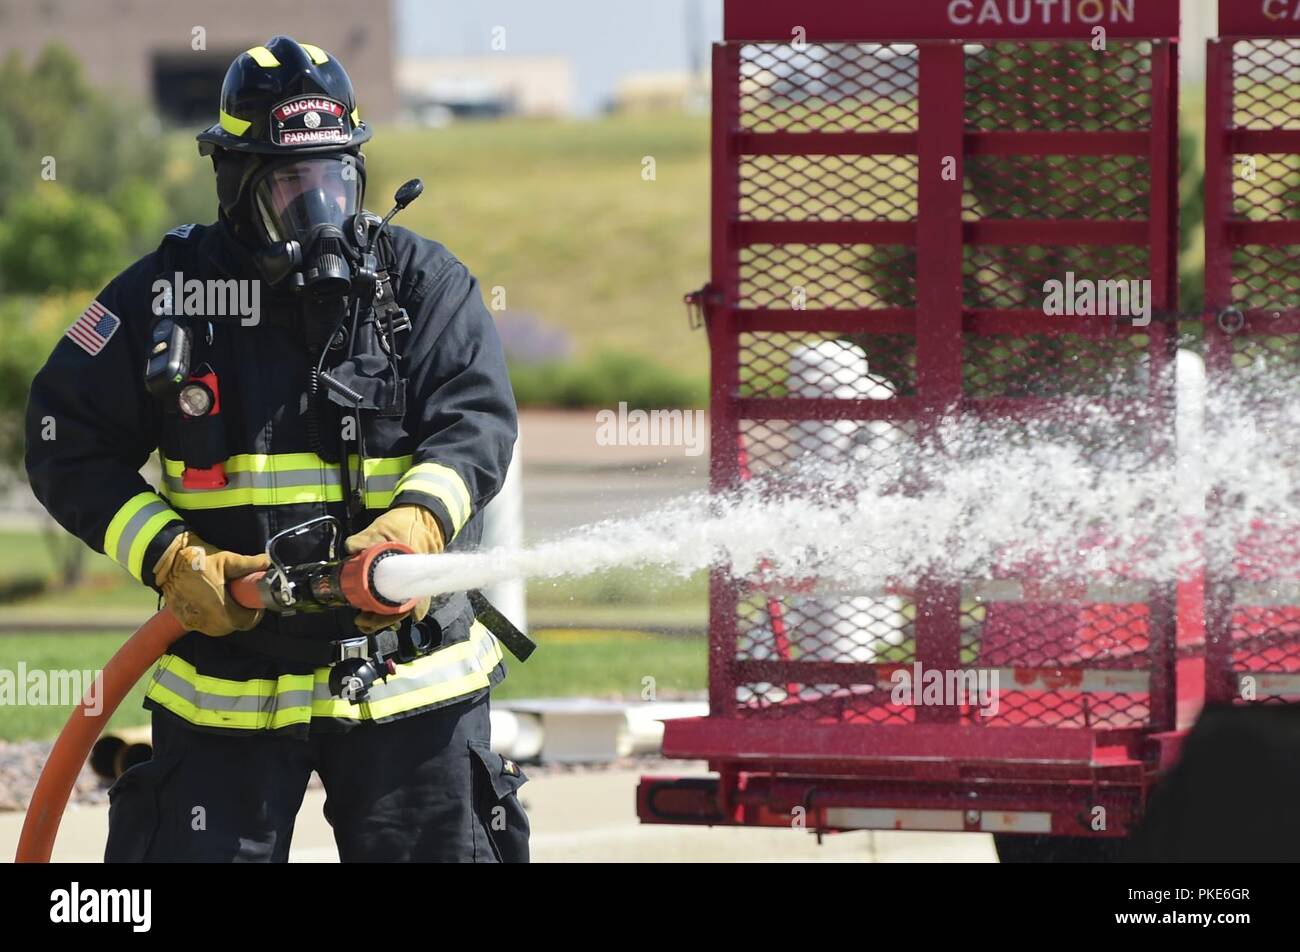 Josh Thomas, 460th Civil Engineer Squadron firefighter, extinguishes a car fire during Exercise Panther View 18-3 July 25, 2018, on Buckley Air Force Base, Colorado. Exercises are held quarterly to test a base’s ability to respond and recover from various incidents. Stock Photo